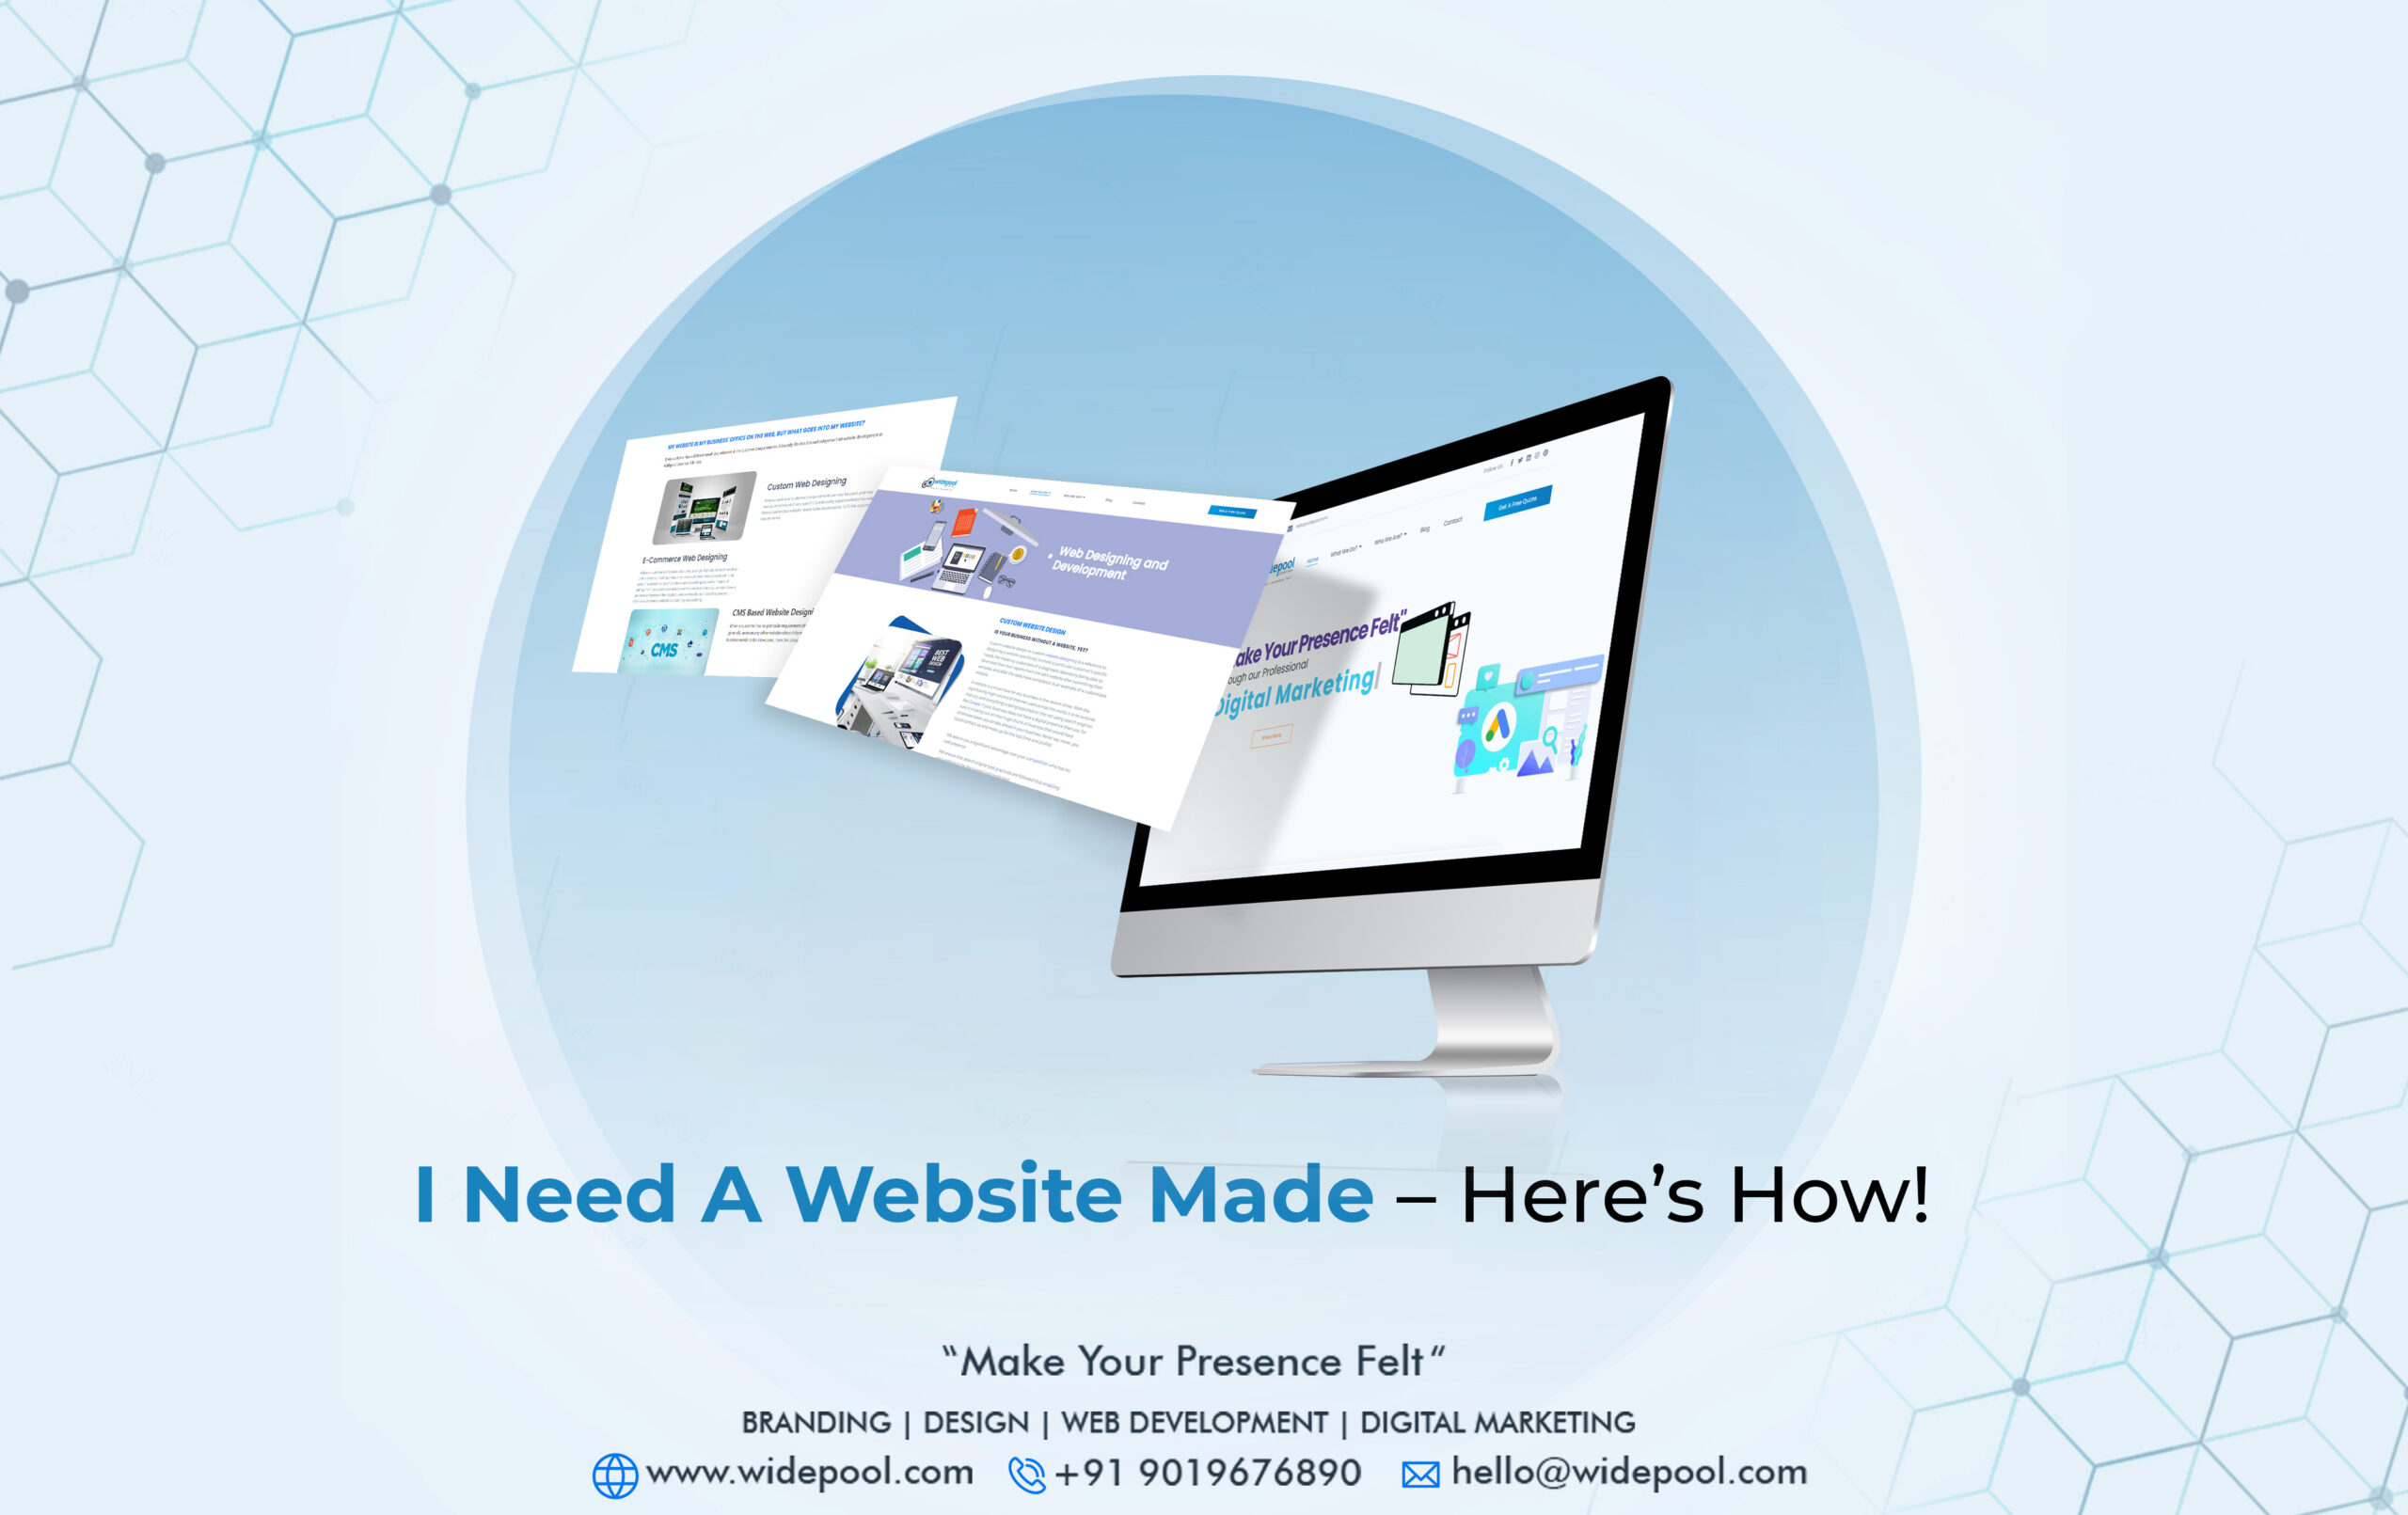 I Need a Website Made – Here’s How!